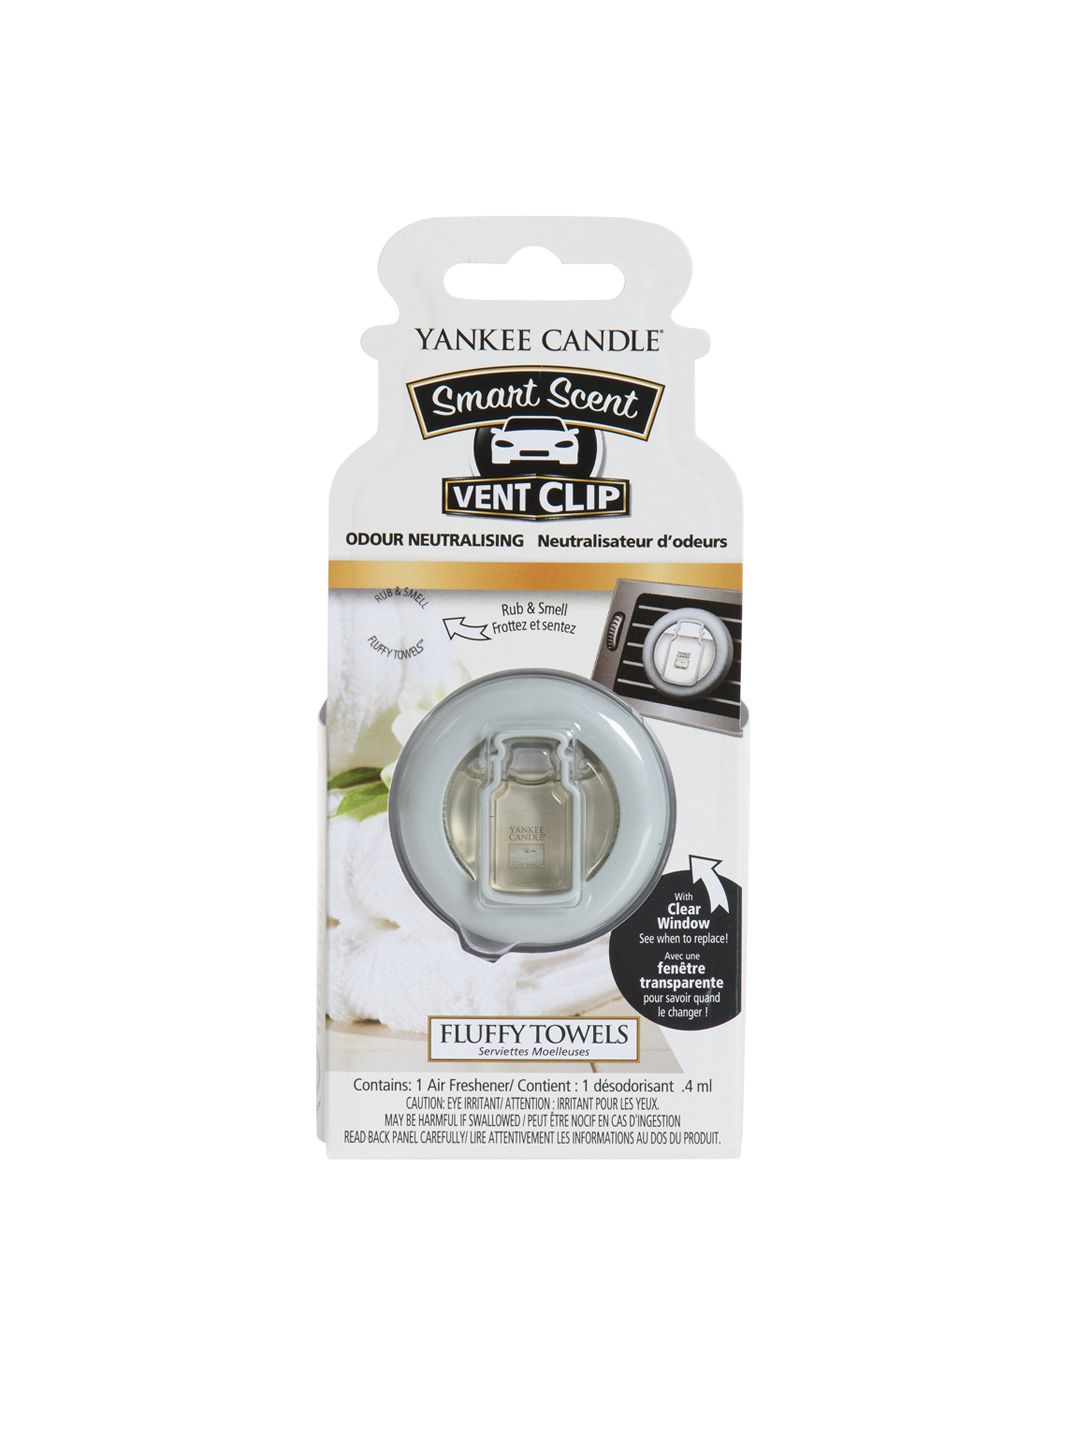 YANKEE CANDLE White Fluffy Towels Smart Scent Vent Clip Air Freshener Price in India